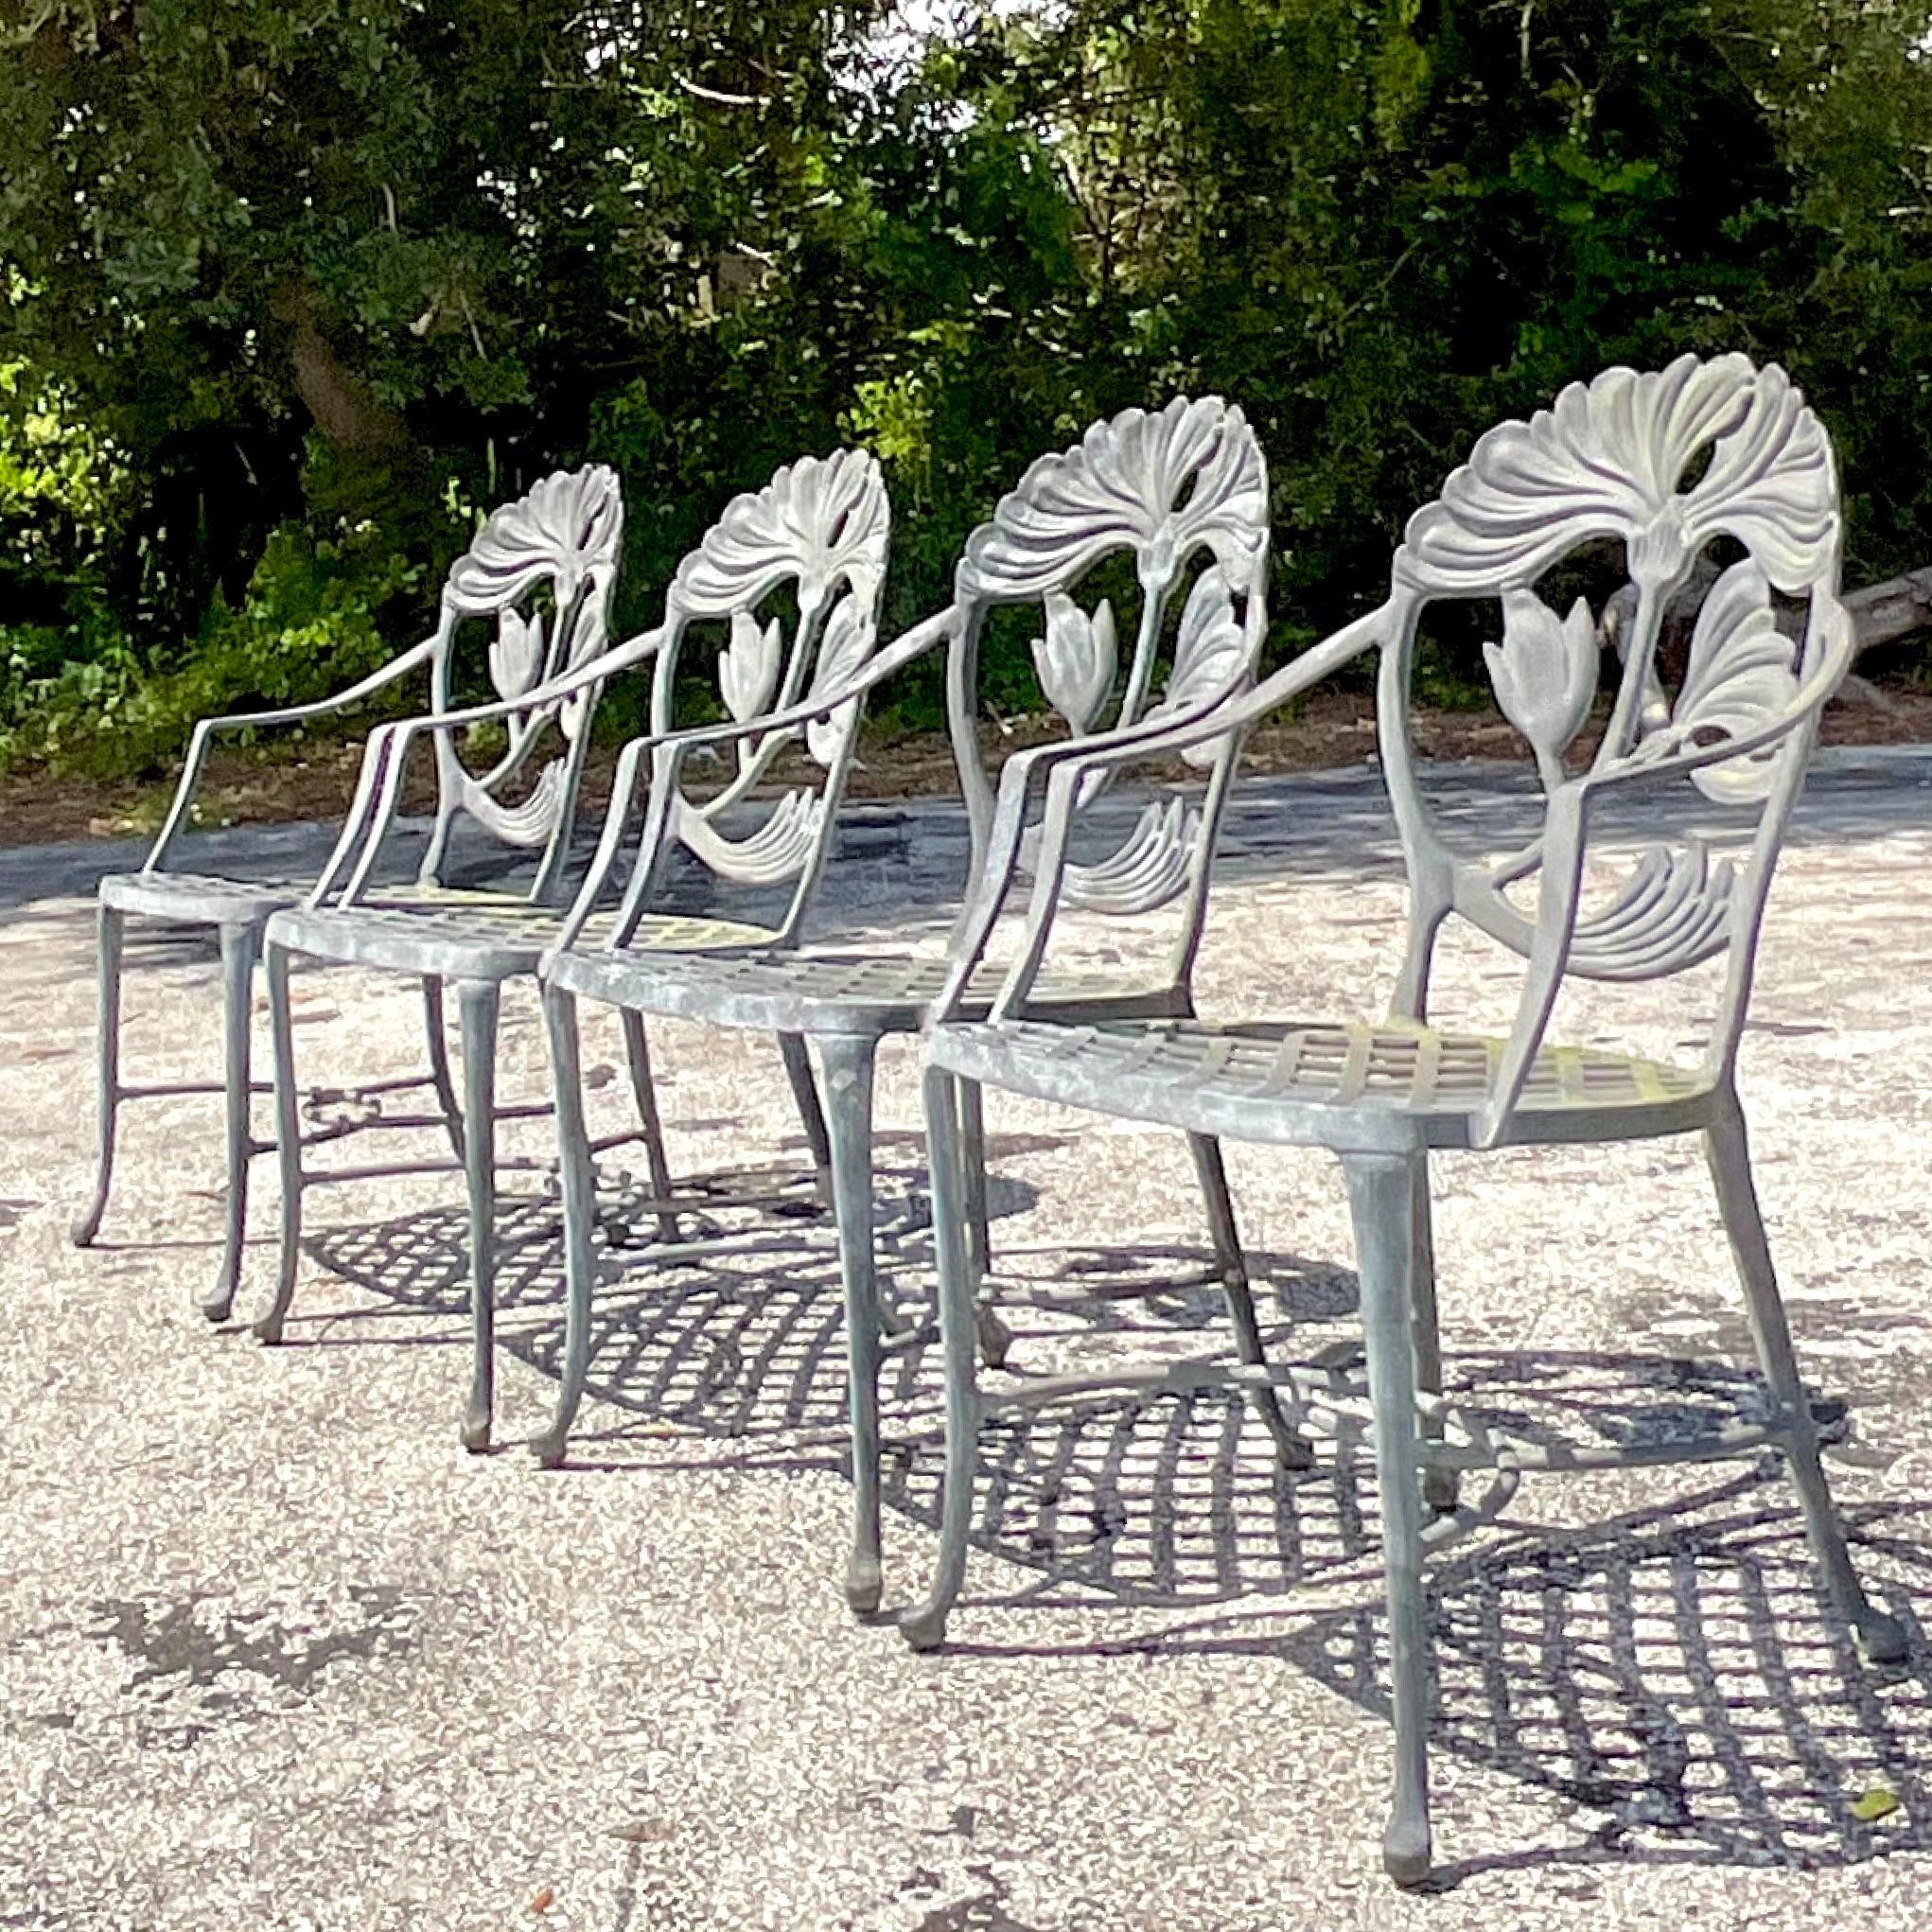 A stunning set of four vintage outdoor dining chairs. Made in a cast aluminum with is lightweight and great for properties near salt water. A beautiful lily design on the back of each chair. Coordinating table also available on my page.